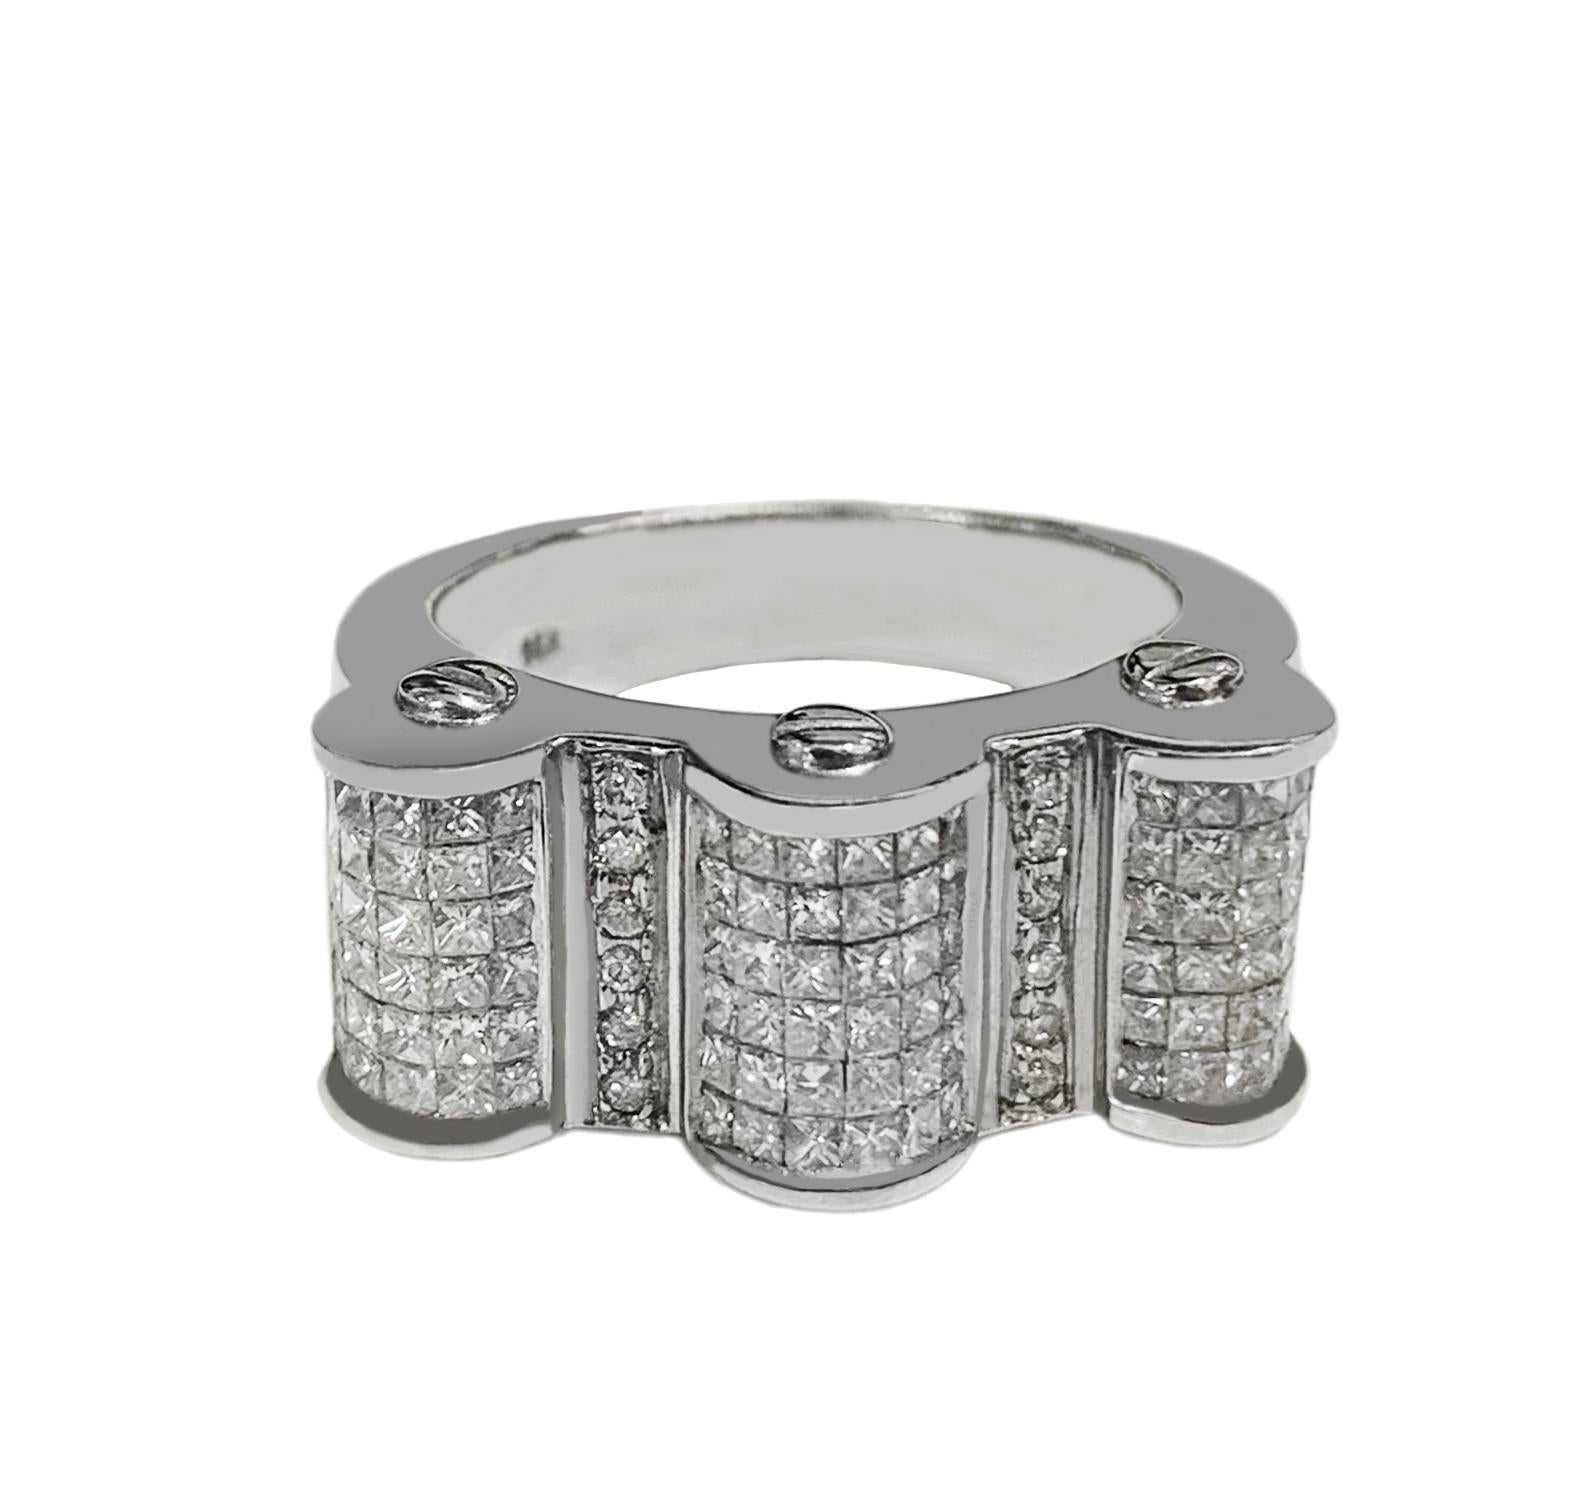 -Custom made

-14k White gold

-Ring size: 9.75

-Weight: 14gr

-Width: 0.2-0.5”

-Diamond: 2.75ct, SI clarity, G color